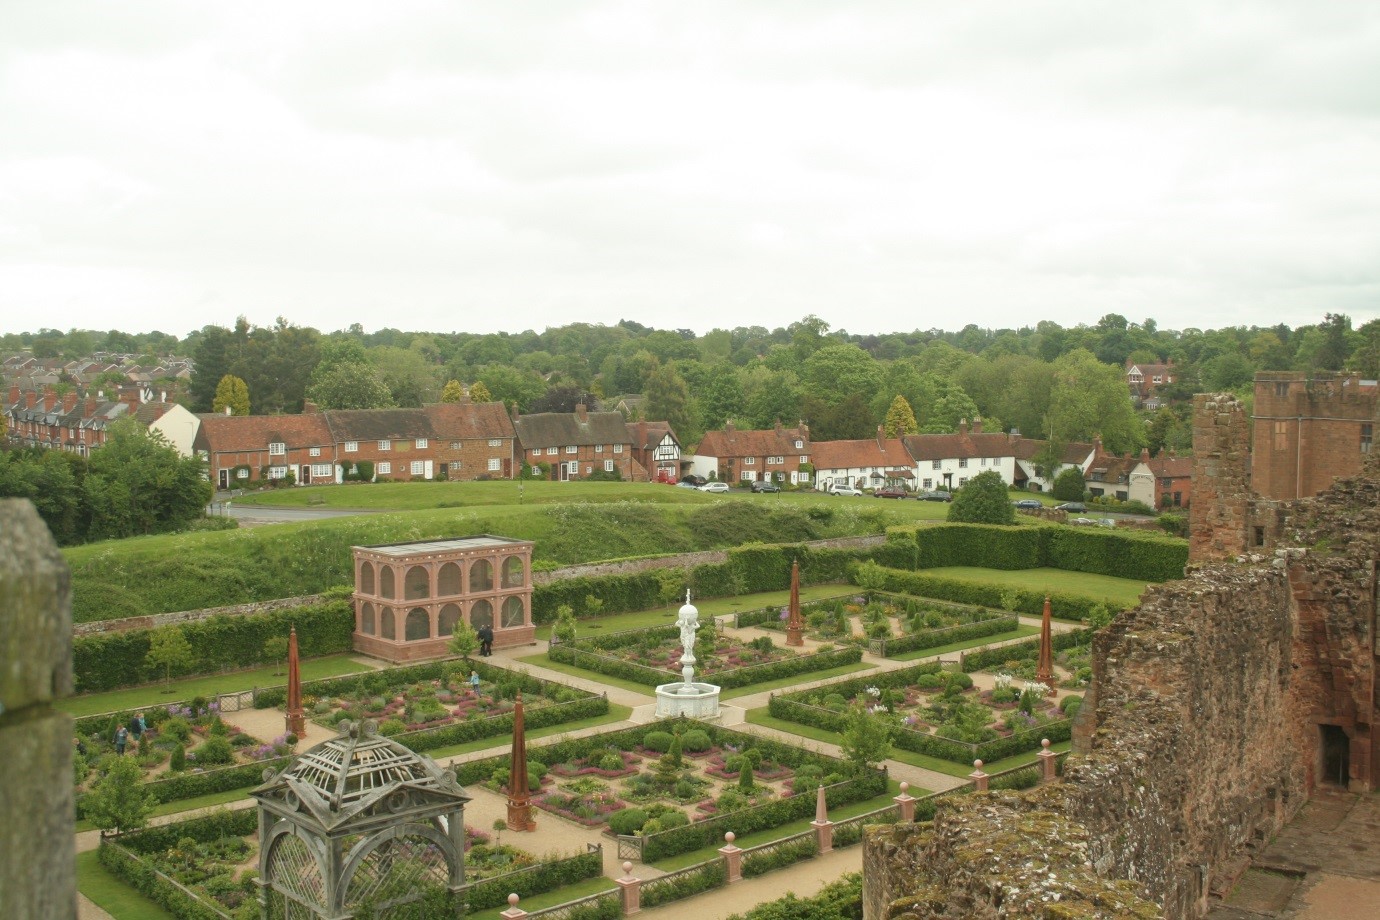 The-Privy-Garden-with-aviary-from-the-top-of-John-of-Gaunt’s-Great-Hall-building